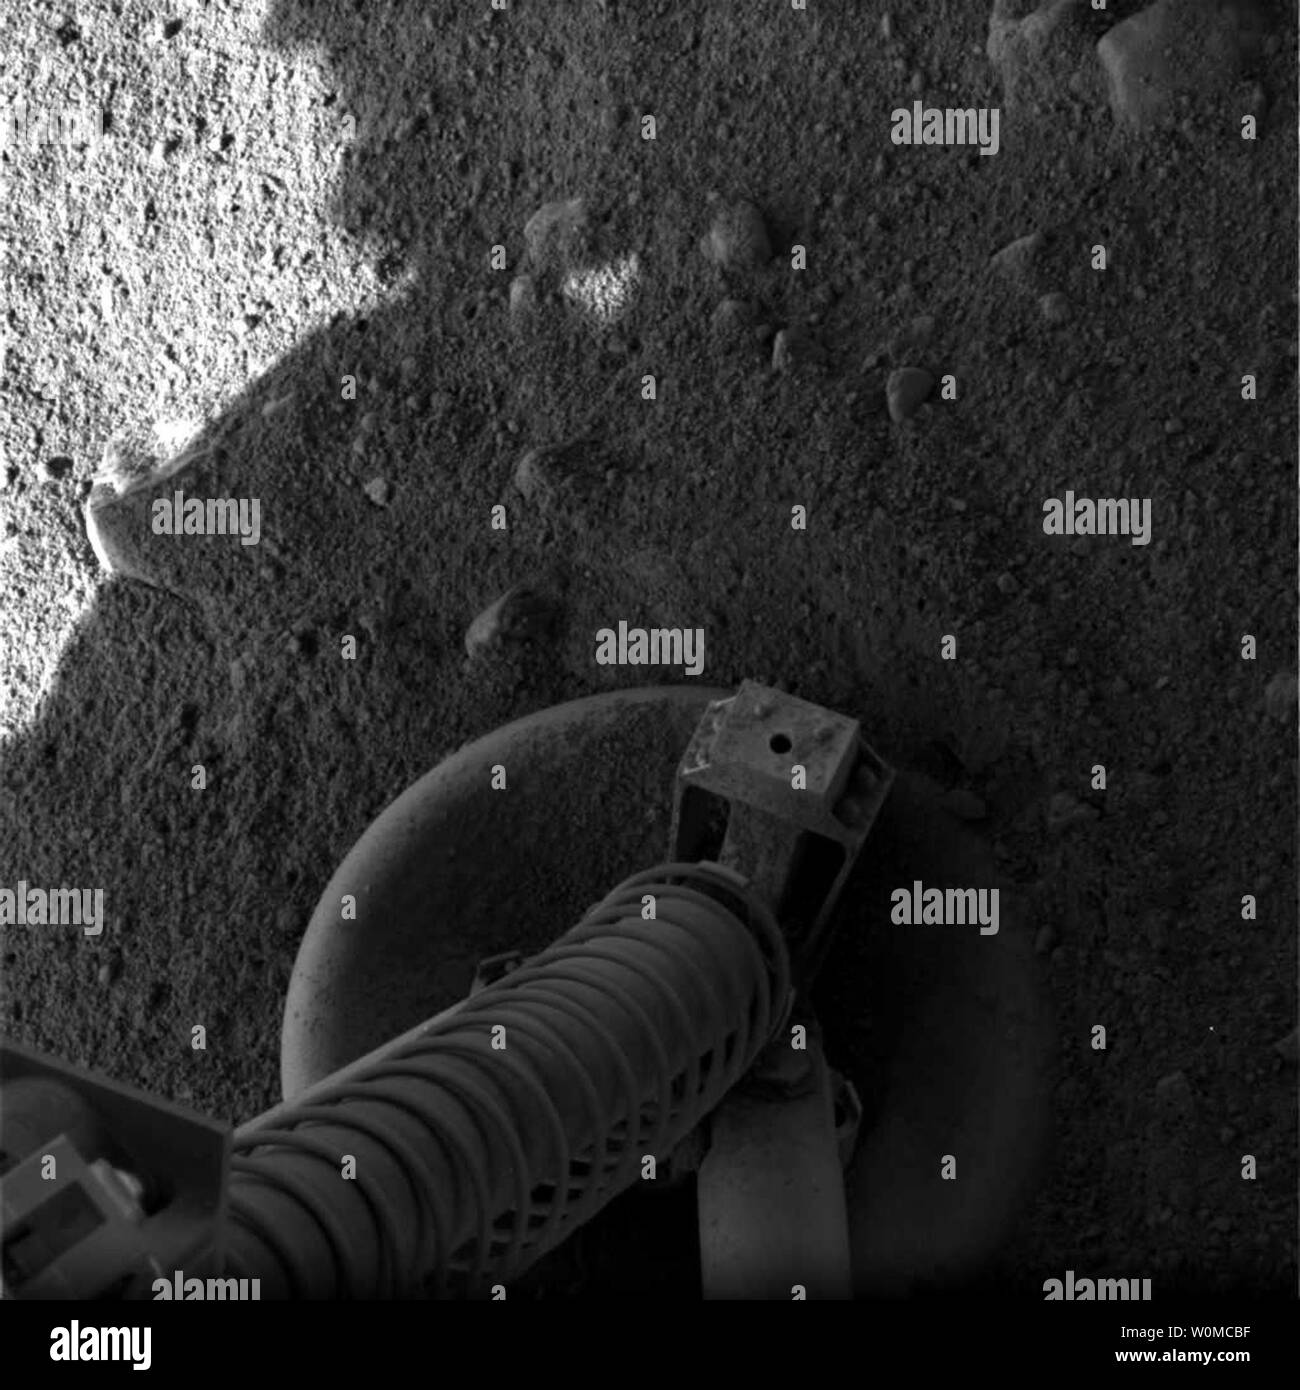 NASA's Phoenix spacecraft landed in the northern polar region of Mars Sunday, May 25, 2008, to begin three months of examining a site chosen for its likelihood of having frozen water within reach of the lander's robotic arm. This black-and-white self-portrait shows Phoenix's leg nestled in the Martian soil. Radio signals received at 7:53 p.m. EDT confirmed the Phoenix Mars Lander had survived its difficult final descent and touchdown 15 minutes earlier. The signals took that long to travel from Mars to Earth at the speed of light. (UPI Photo/NASA, JPL-Caltech, University of Arizona) Stock Photo